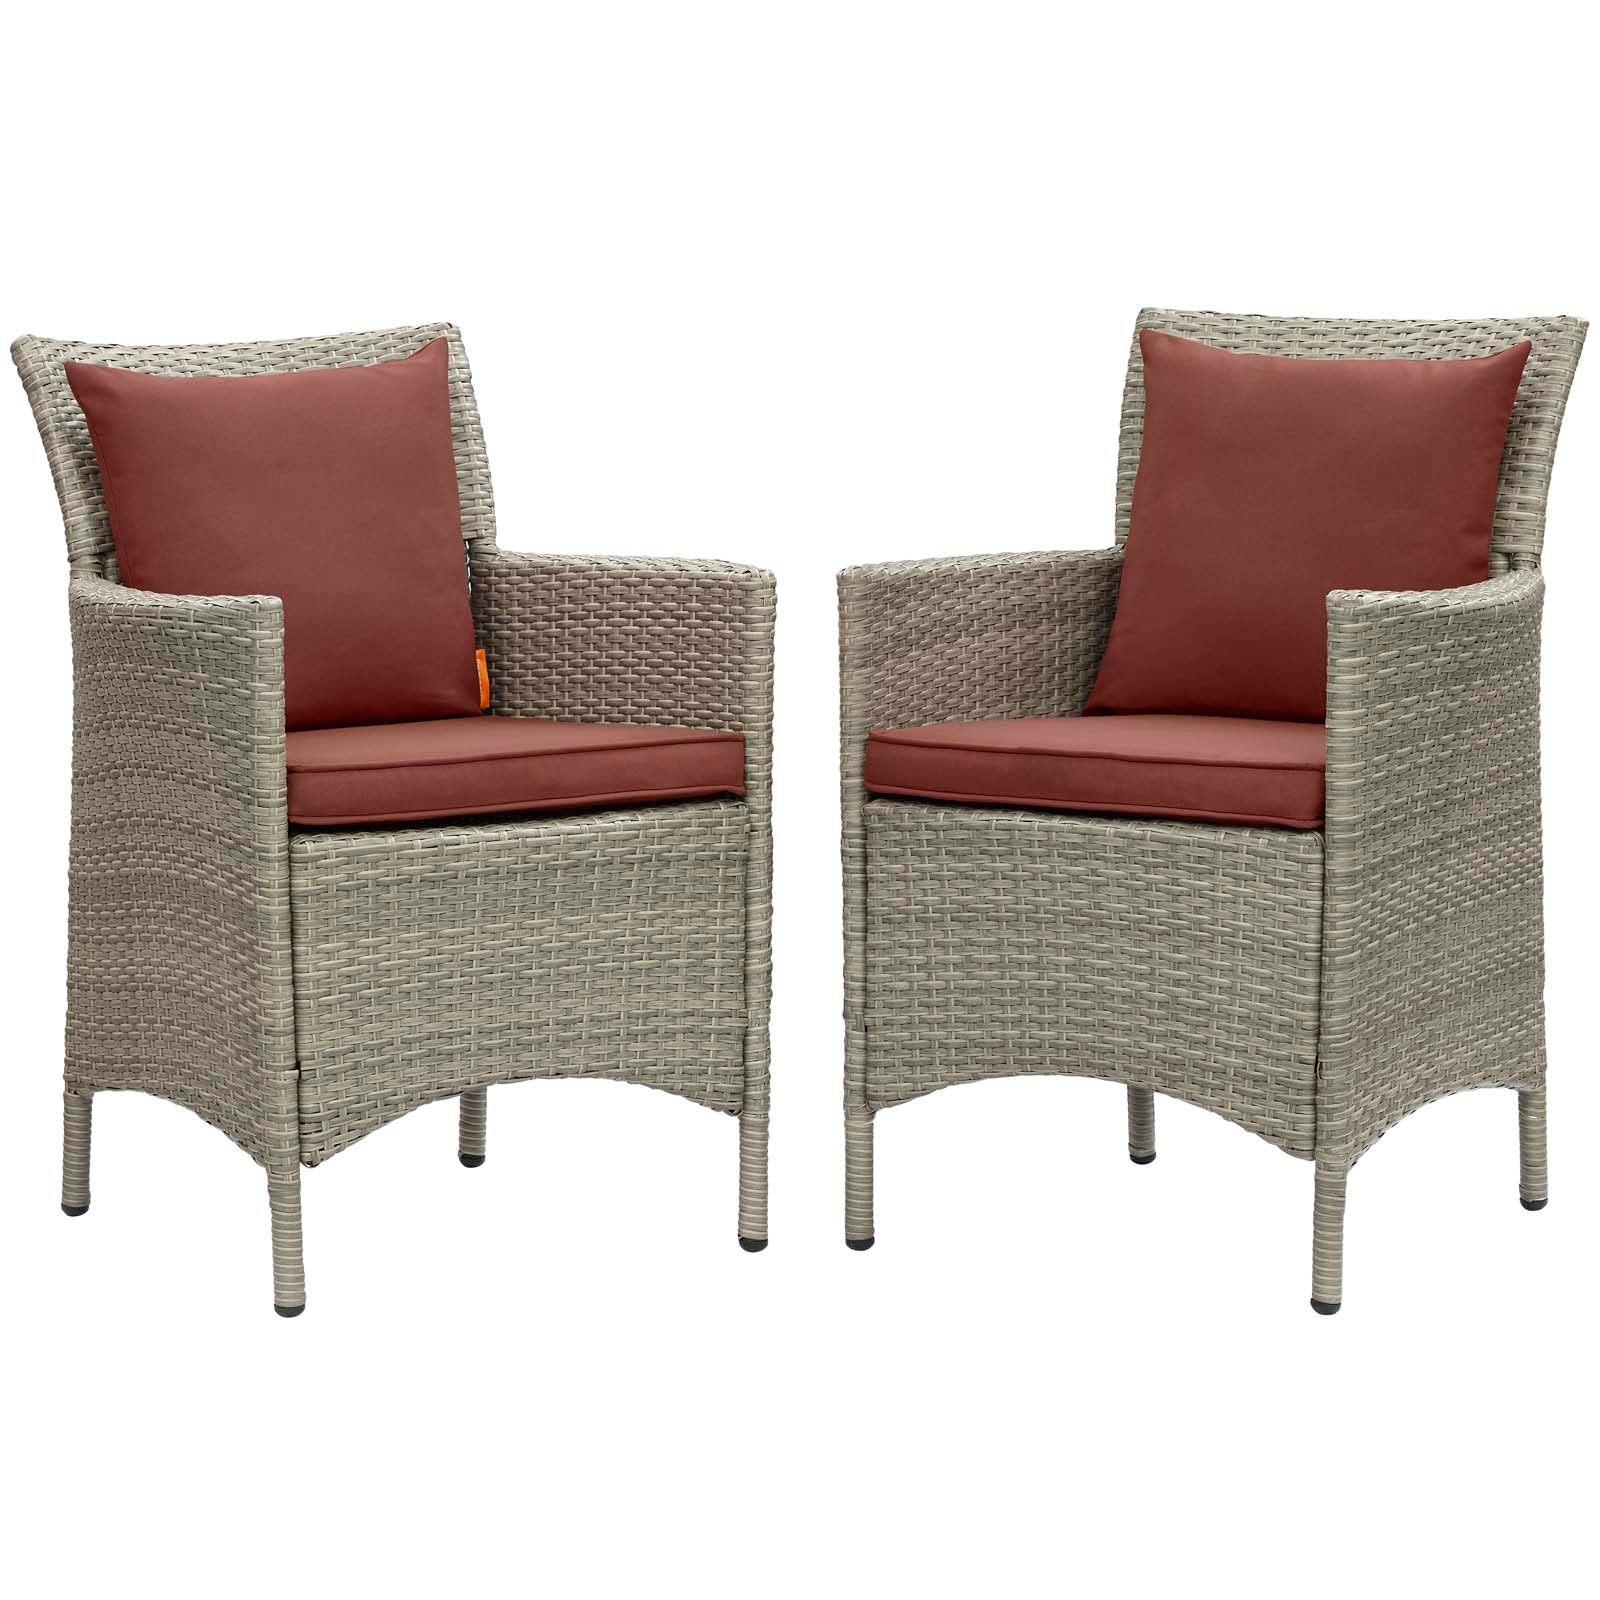 Modway Outdoor Barstools - Conduit Outdoor Patio Wicker Rattan Dining Armchair (Set of 2) Light Gray Currant